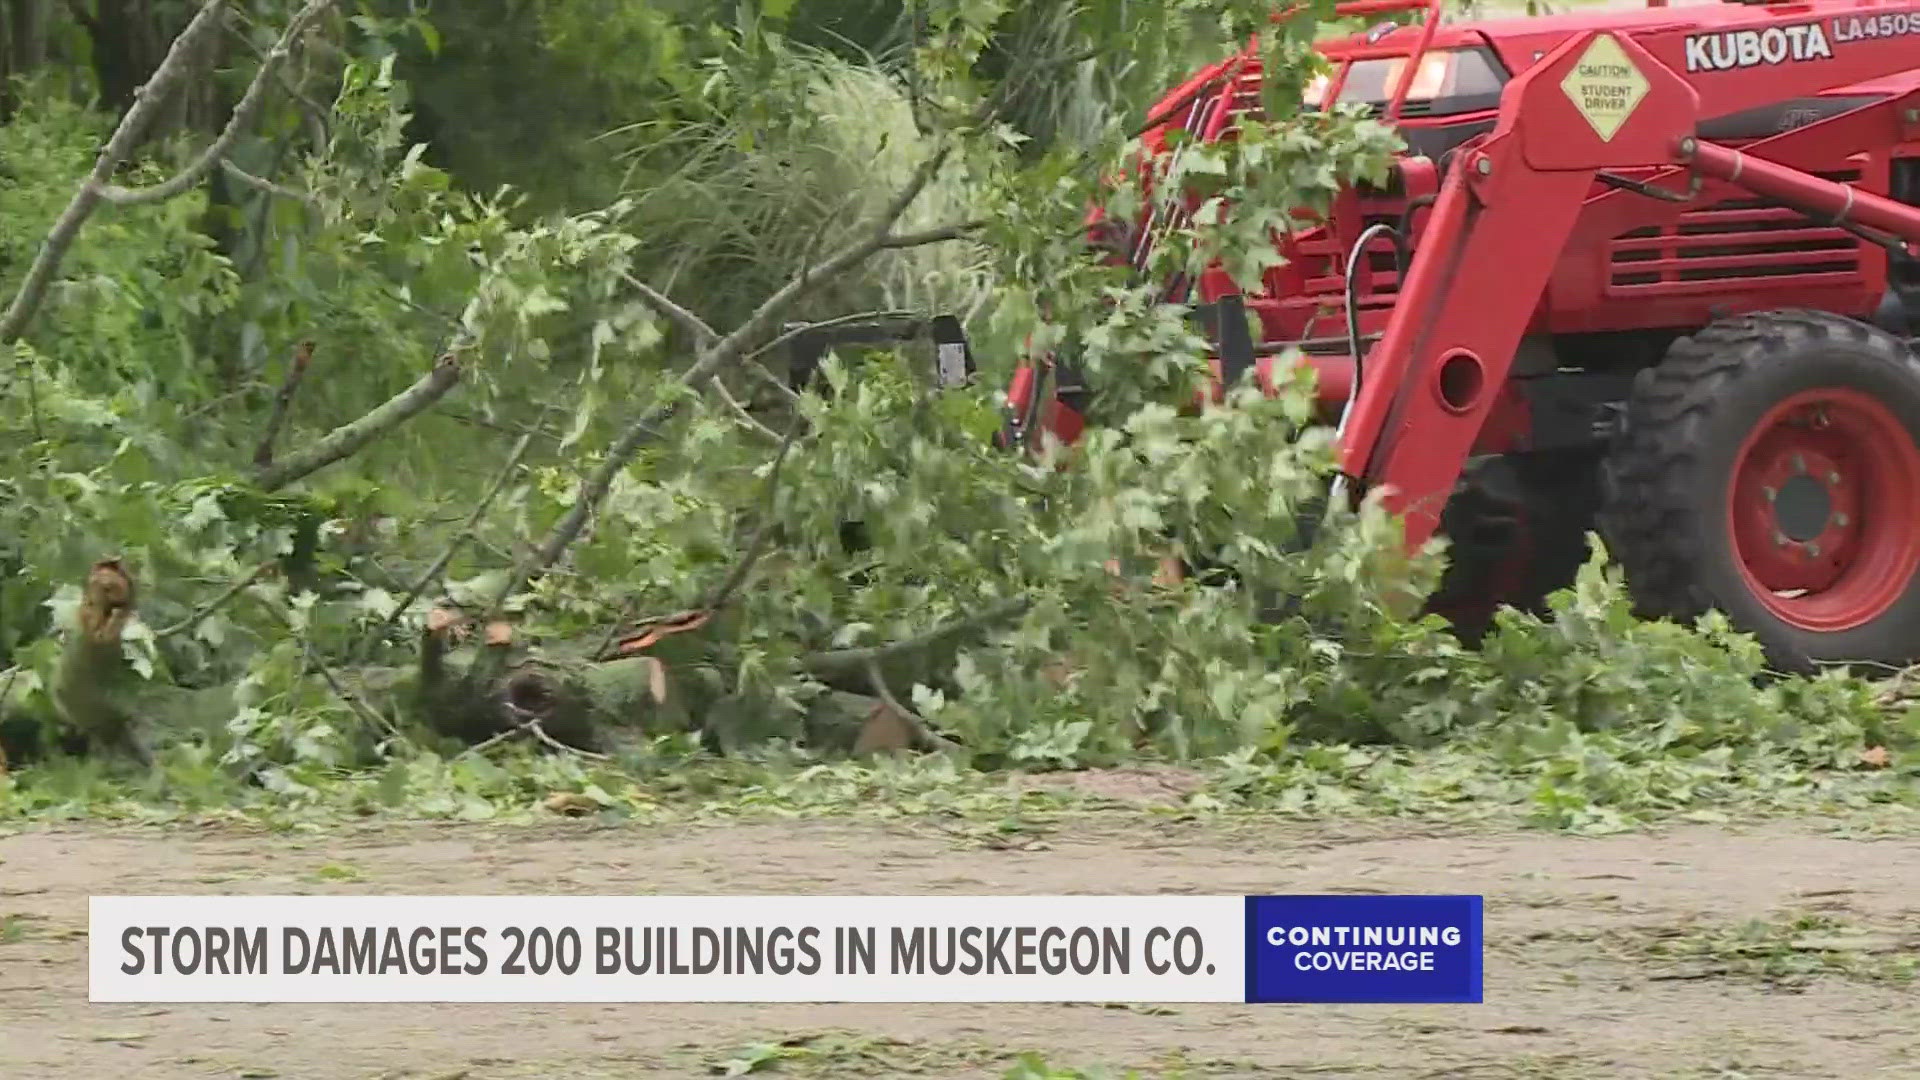 As officials in Muskegon County begin assessing storm damage, the extent of wreckage is becoming clear.